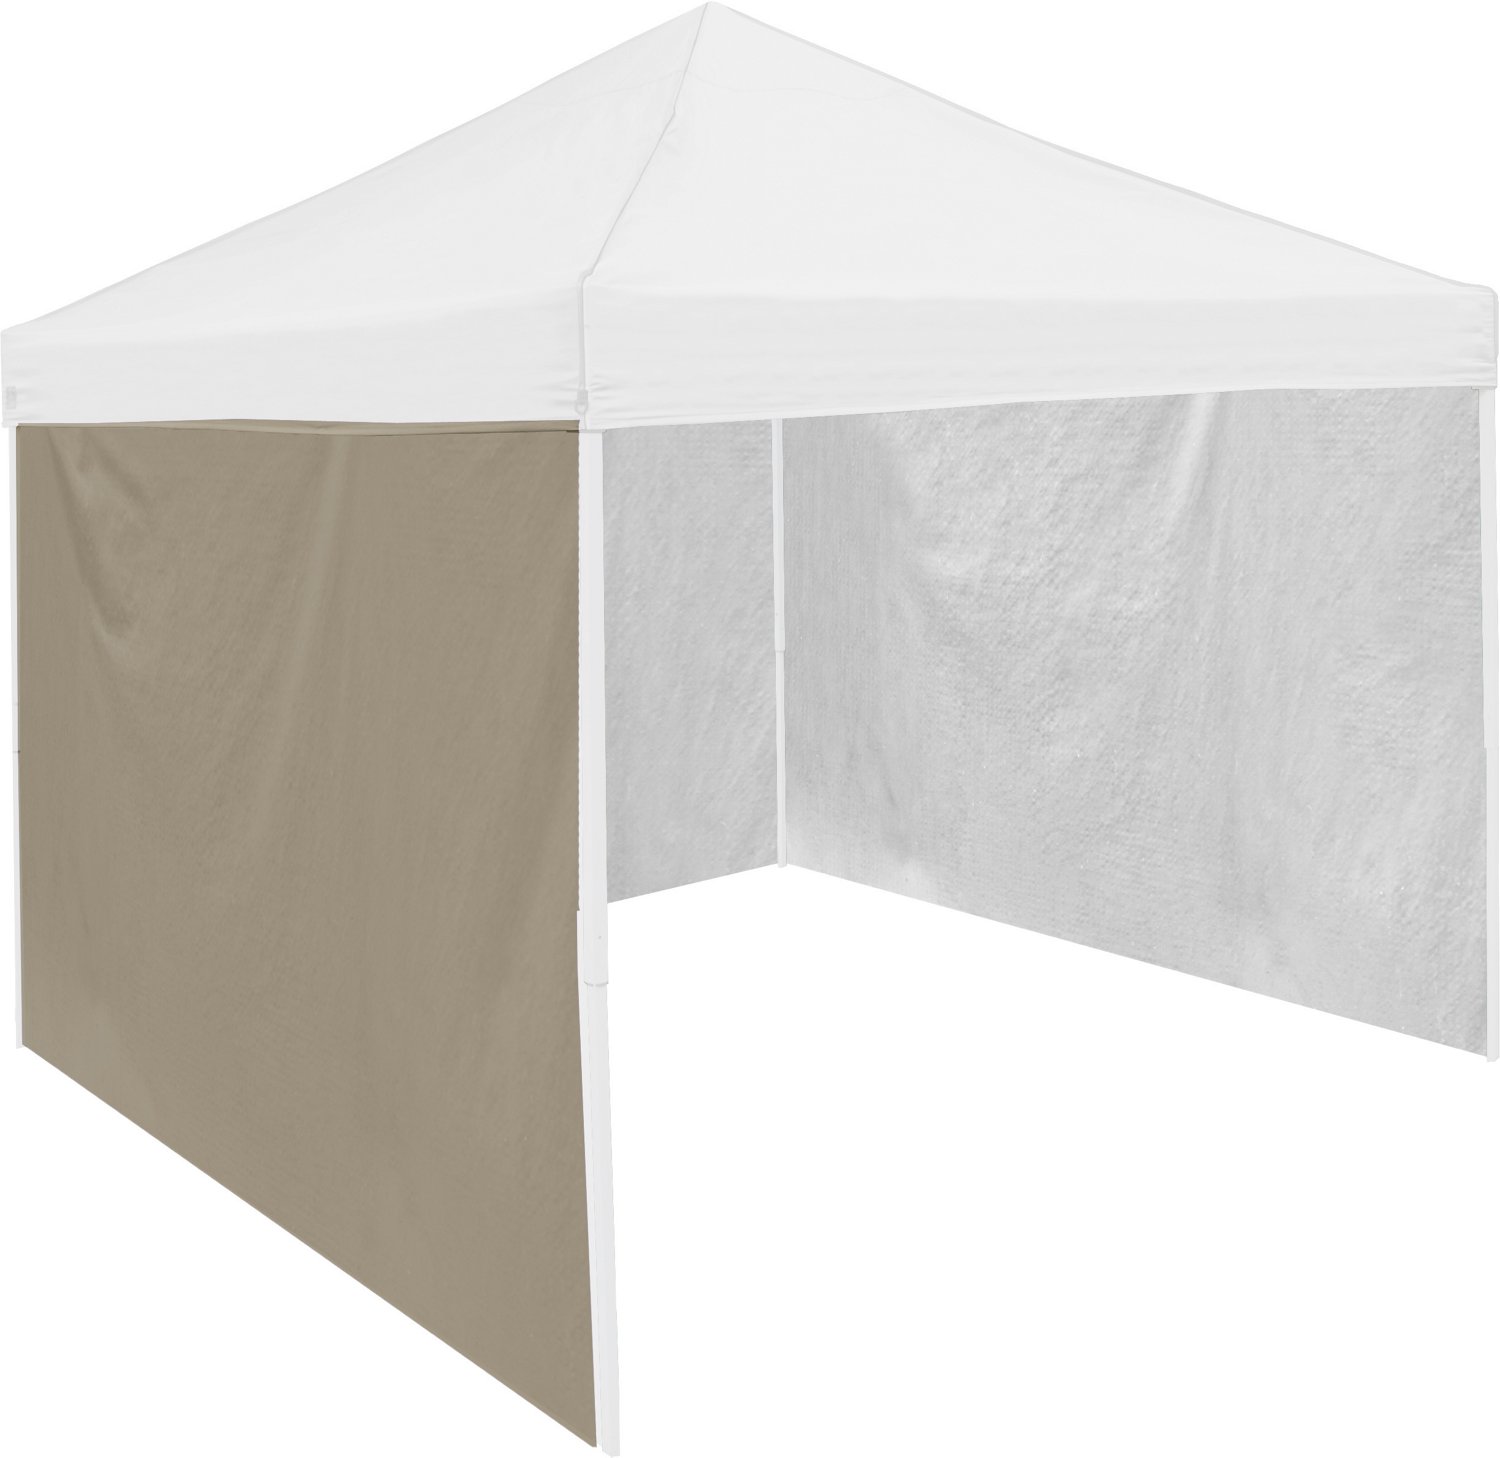 Academy Sports + Outdoors 10 x 10 Solid Straight Leg Canopy Sunshade Sidewall                                                    - view number 1 selected